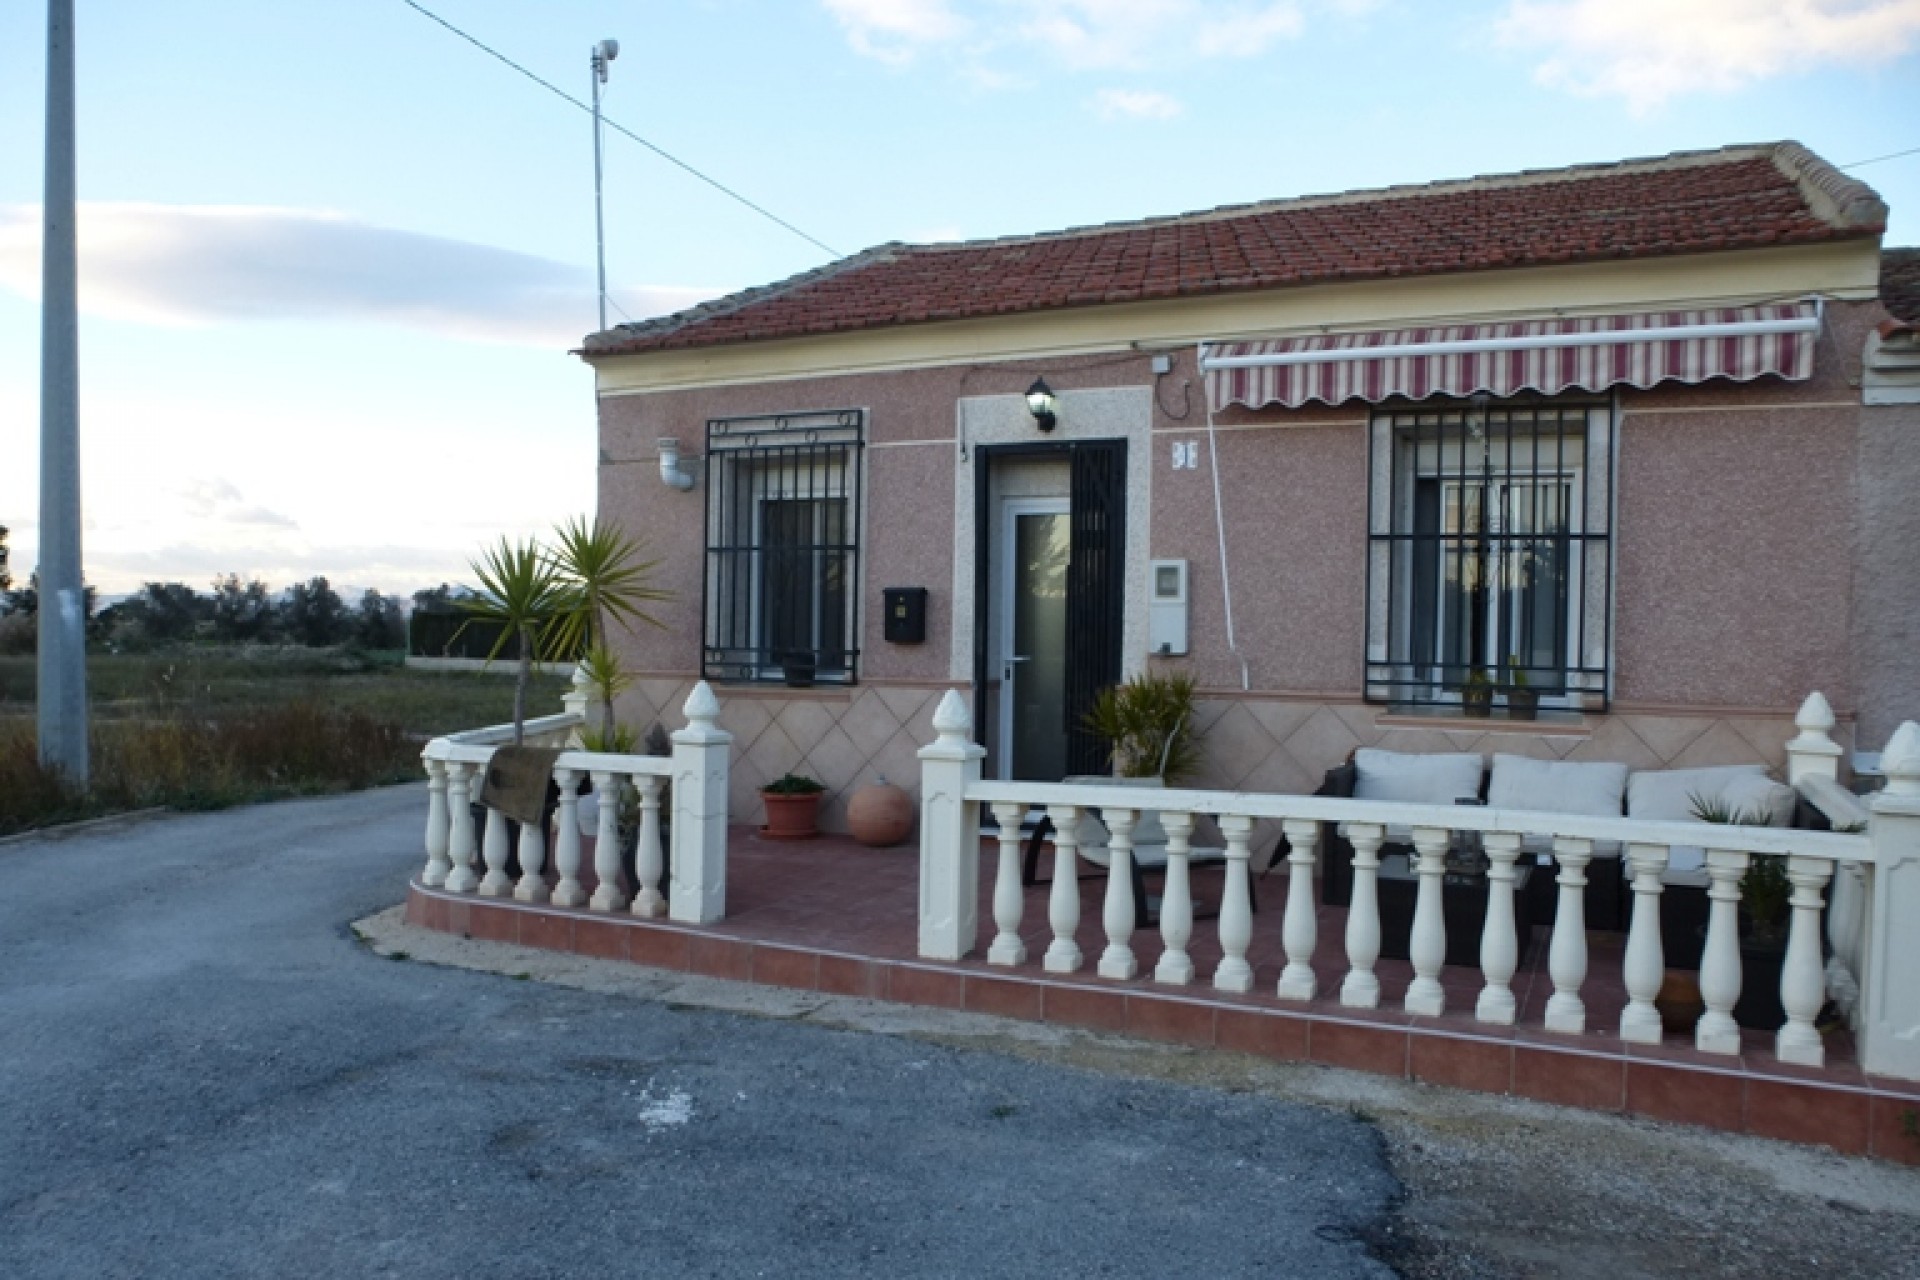 Re-Sale - Bungalow - Heredades - Heredades - Country